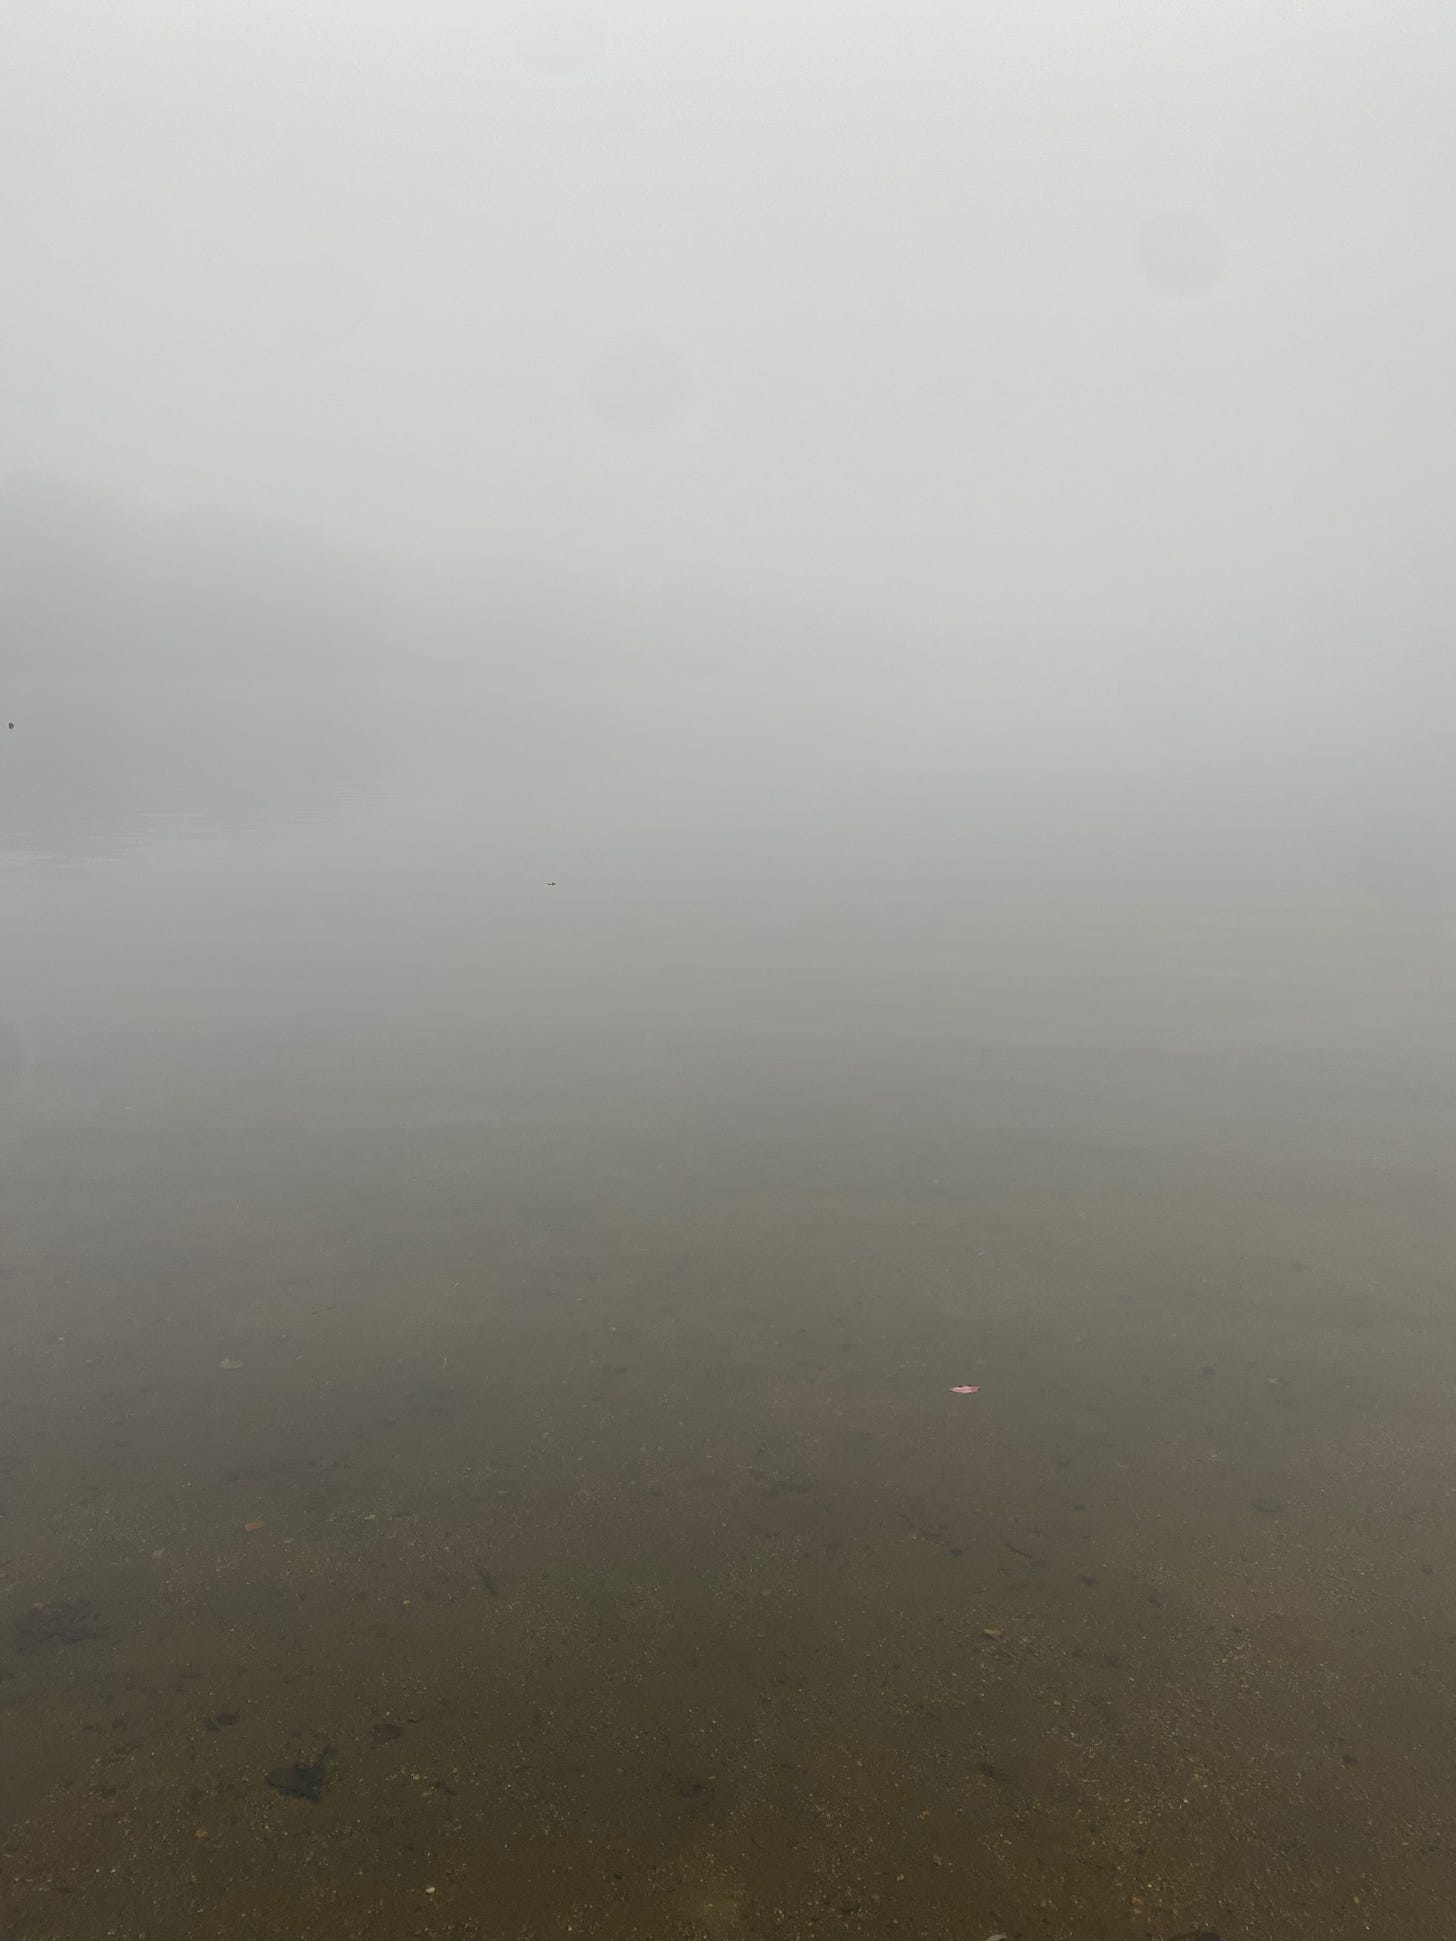 Ashfield Lake in the fog; the water is basically invisible in the mist.